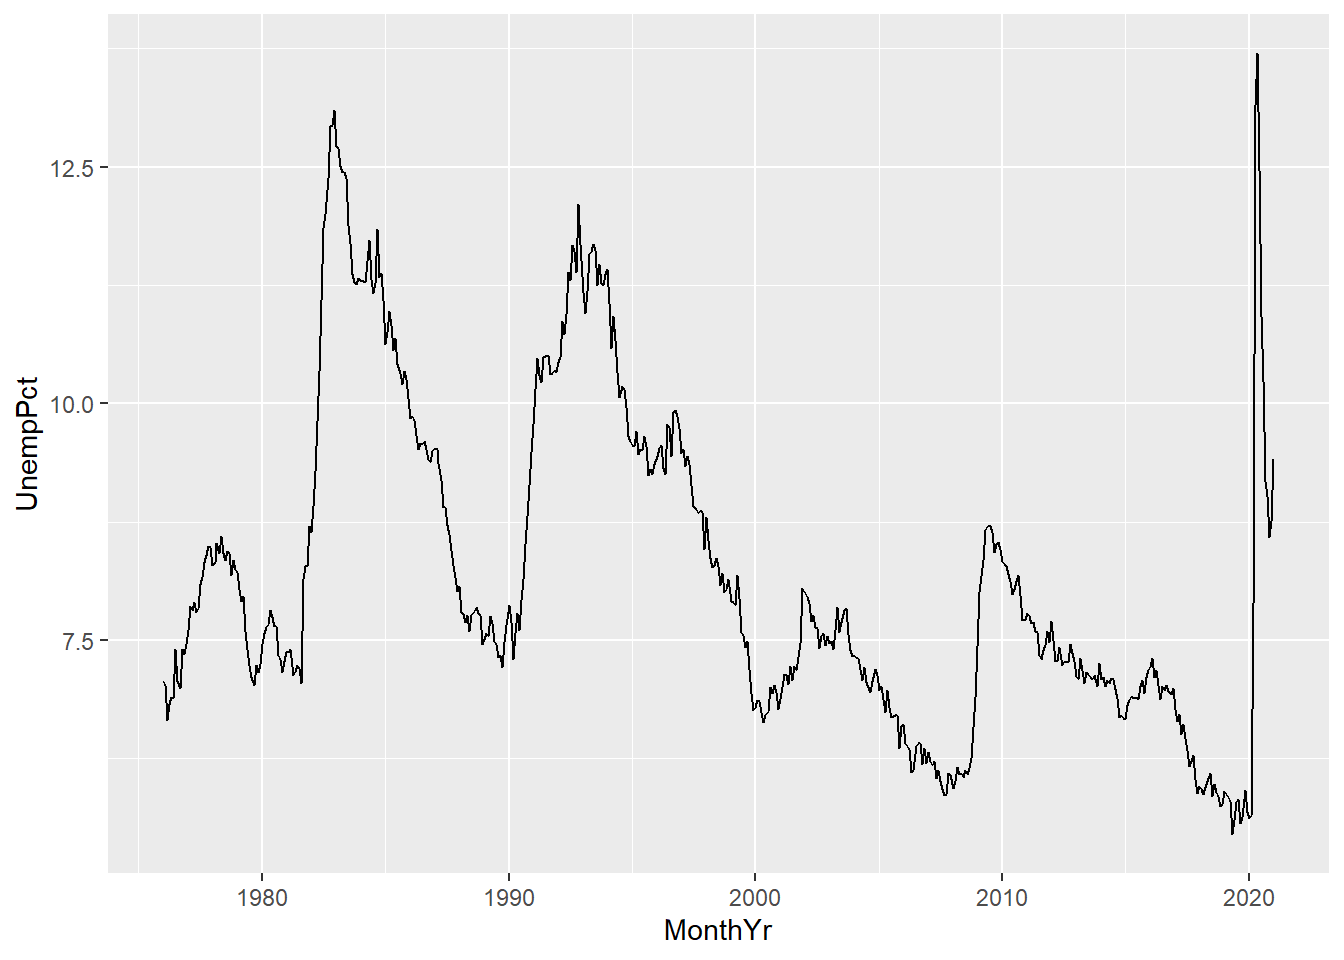 *A time series graph created in ggplot*